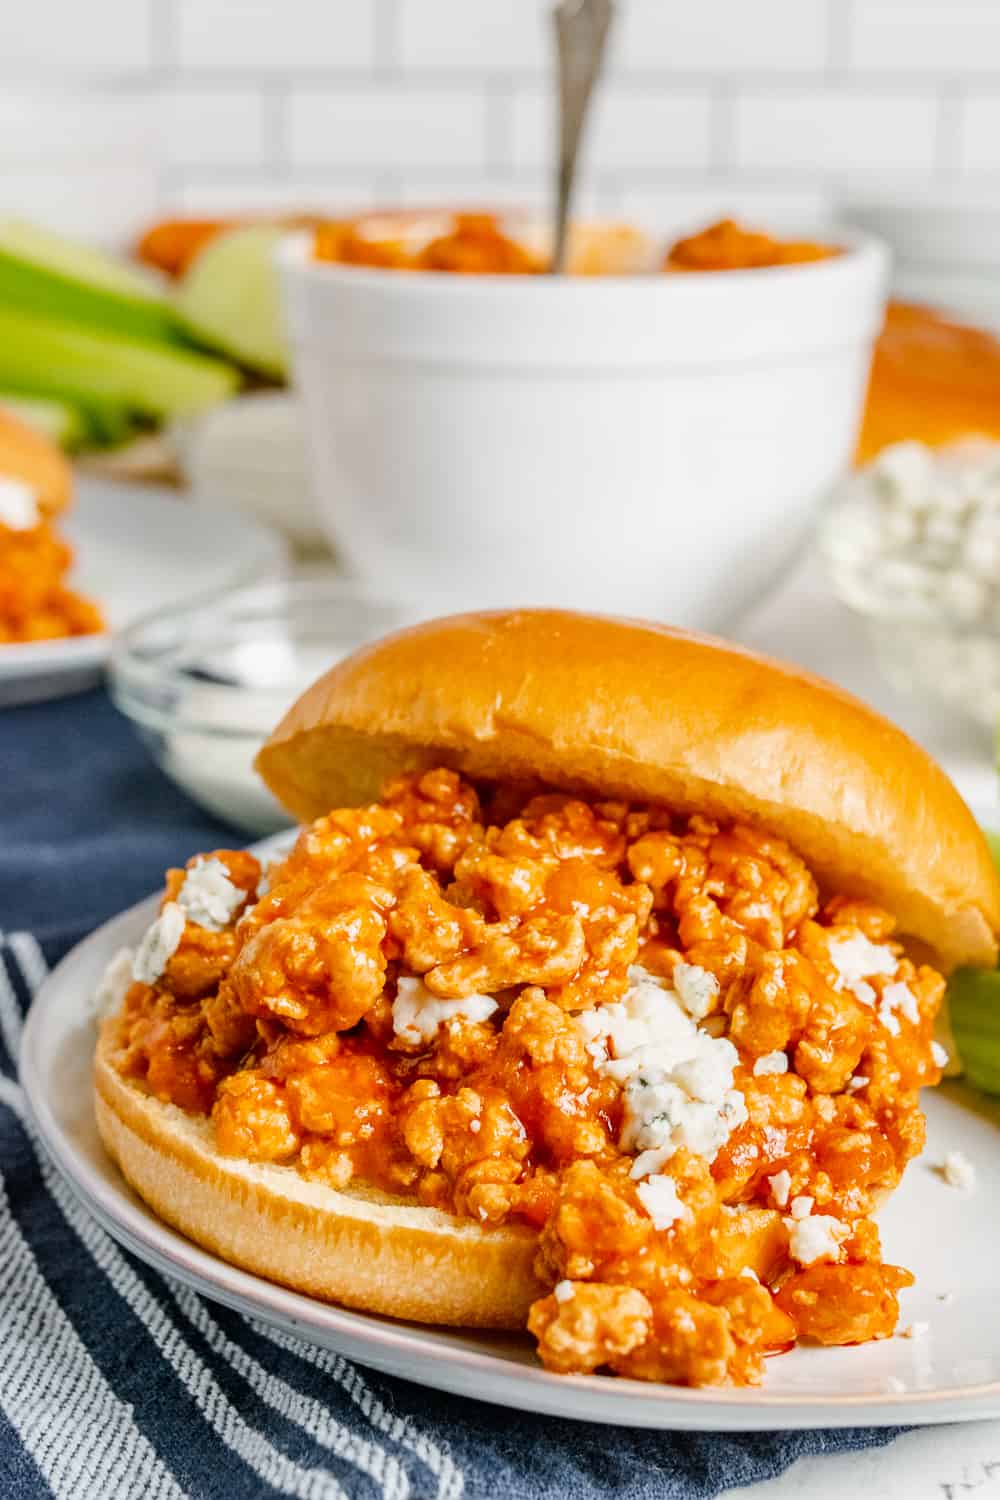 Buffalo chicken sloppy joes sandwich on a bun with crumbled blue cheese